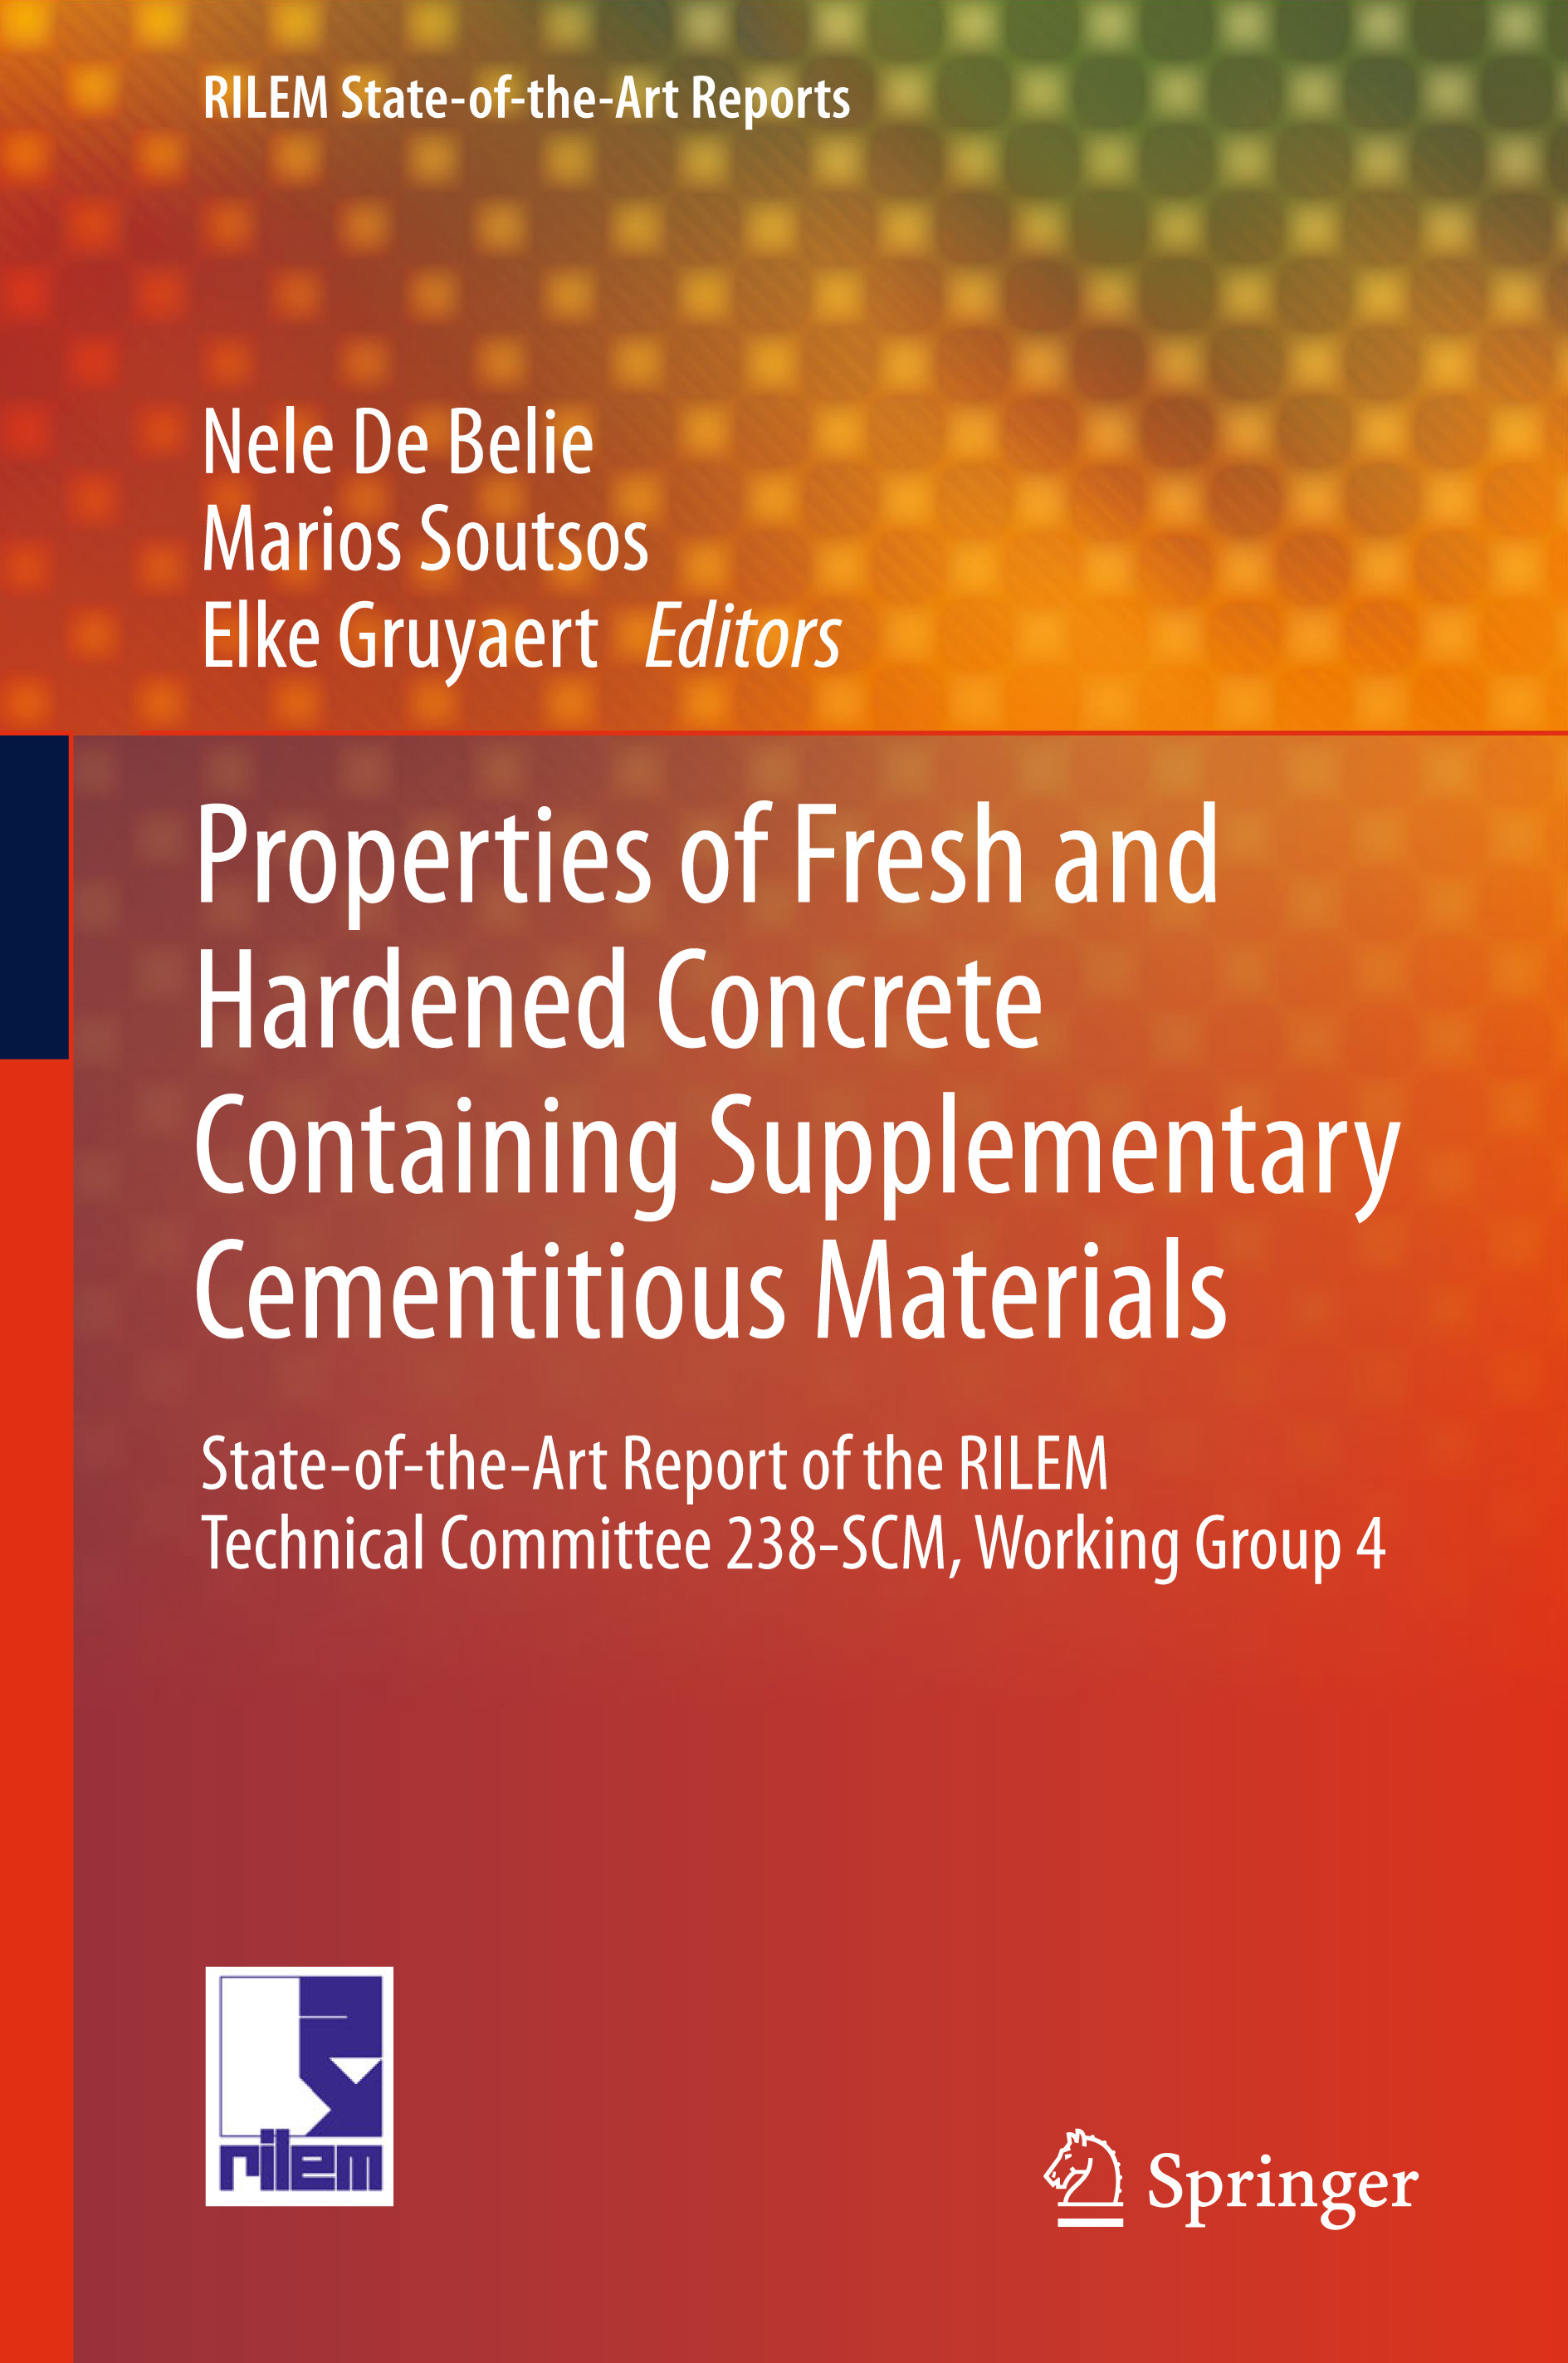 Belie, Nele De - Properties of Fresh and Hardened Concrete Containing Supplementary Cementitious Materials, ebook